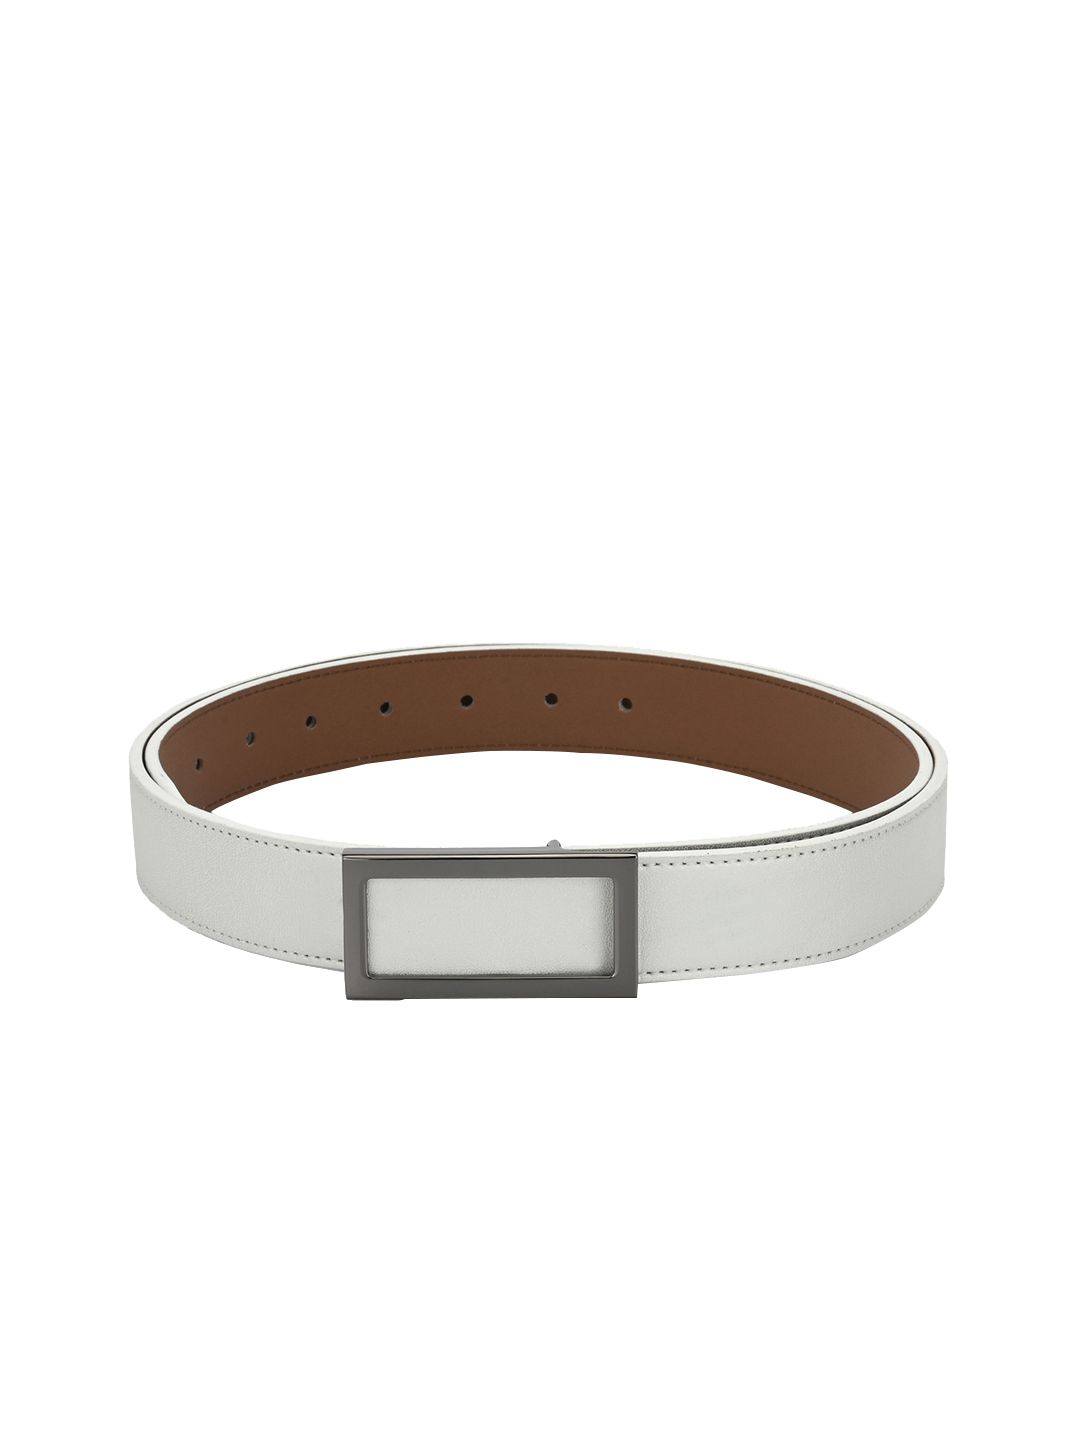 Calvadoss Women White Solid Belt Price in India